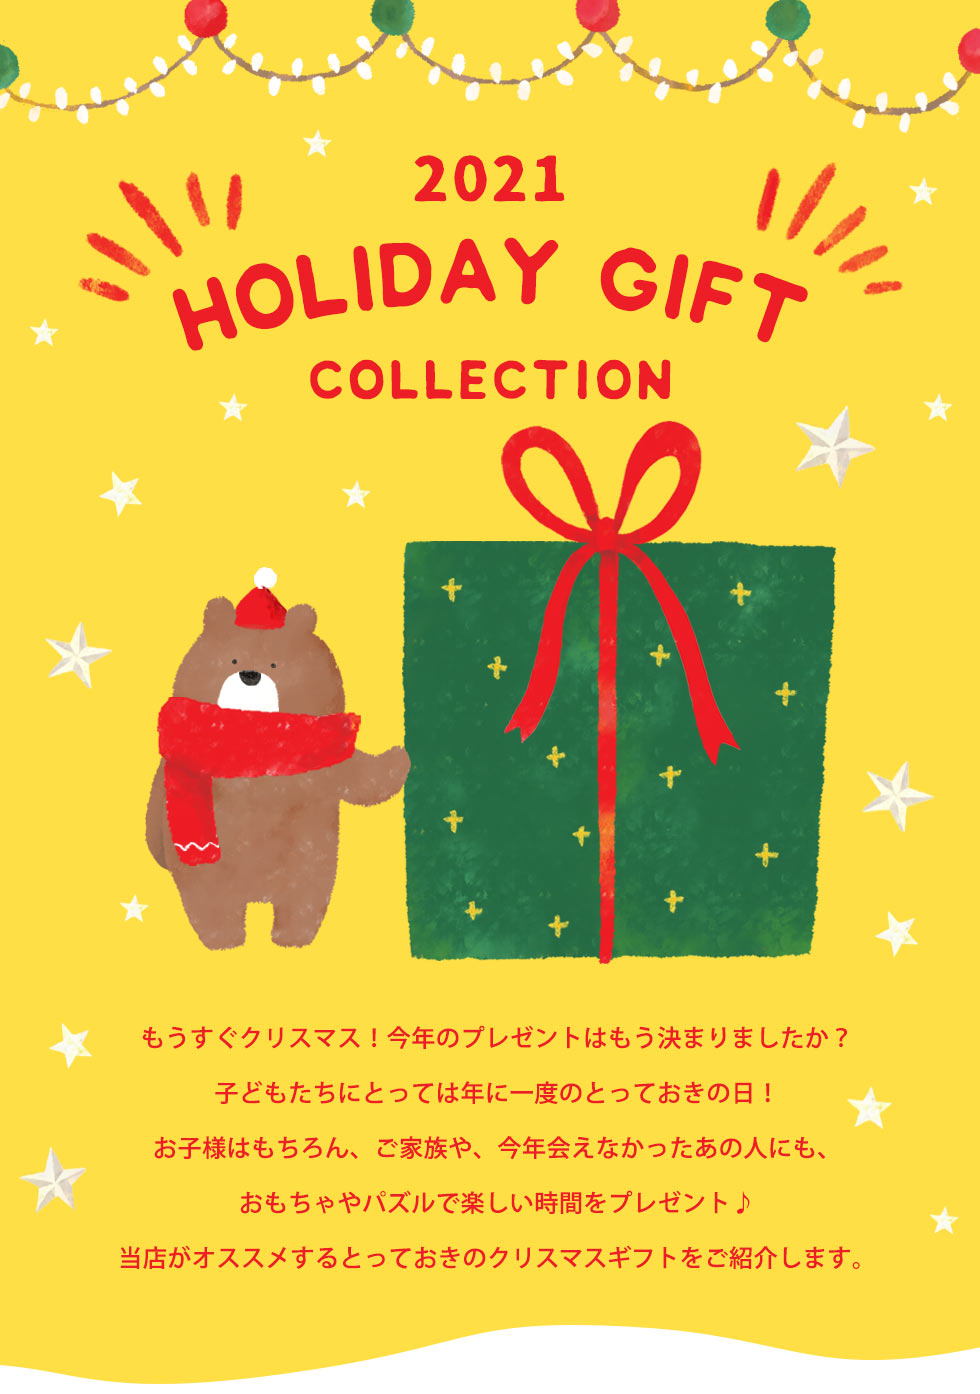 2021 HOLIDAY GIFT COLLECTION